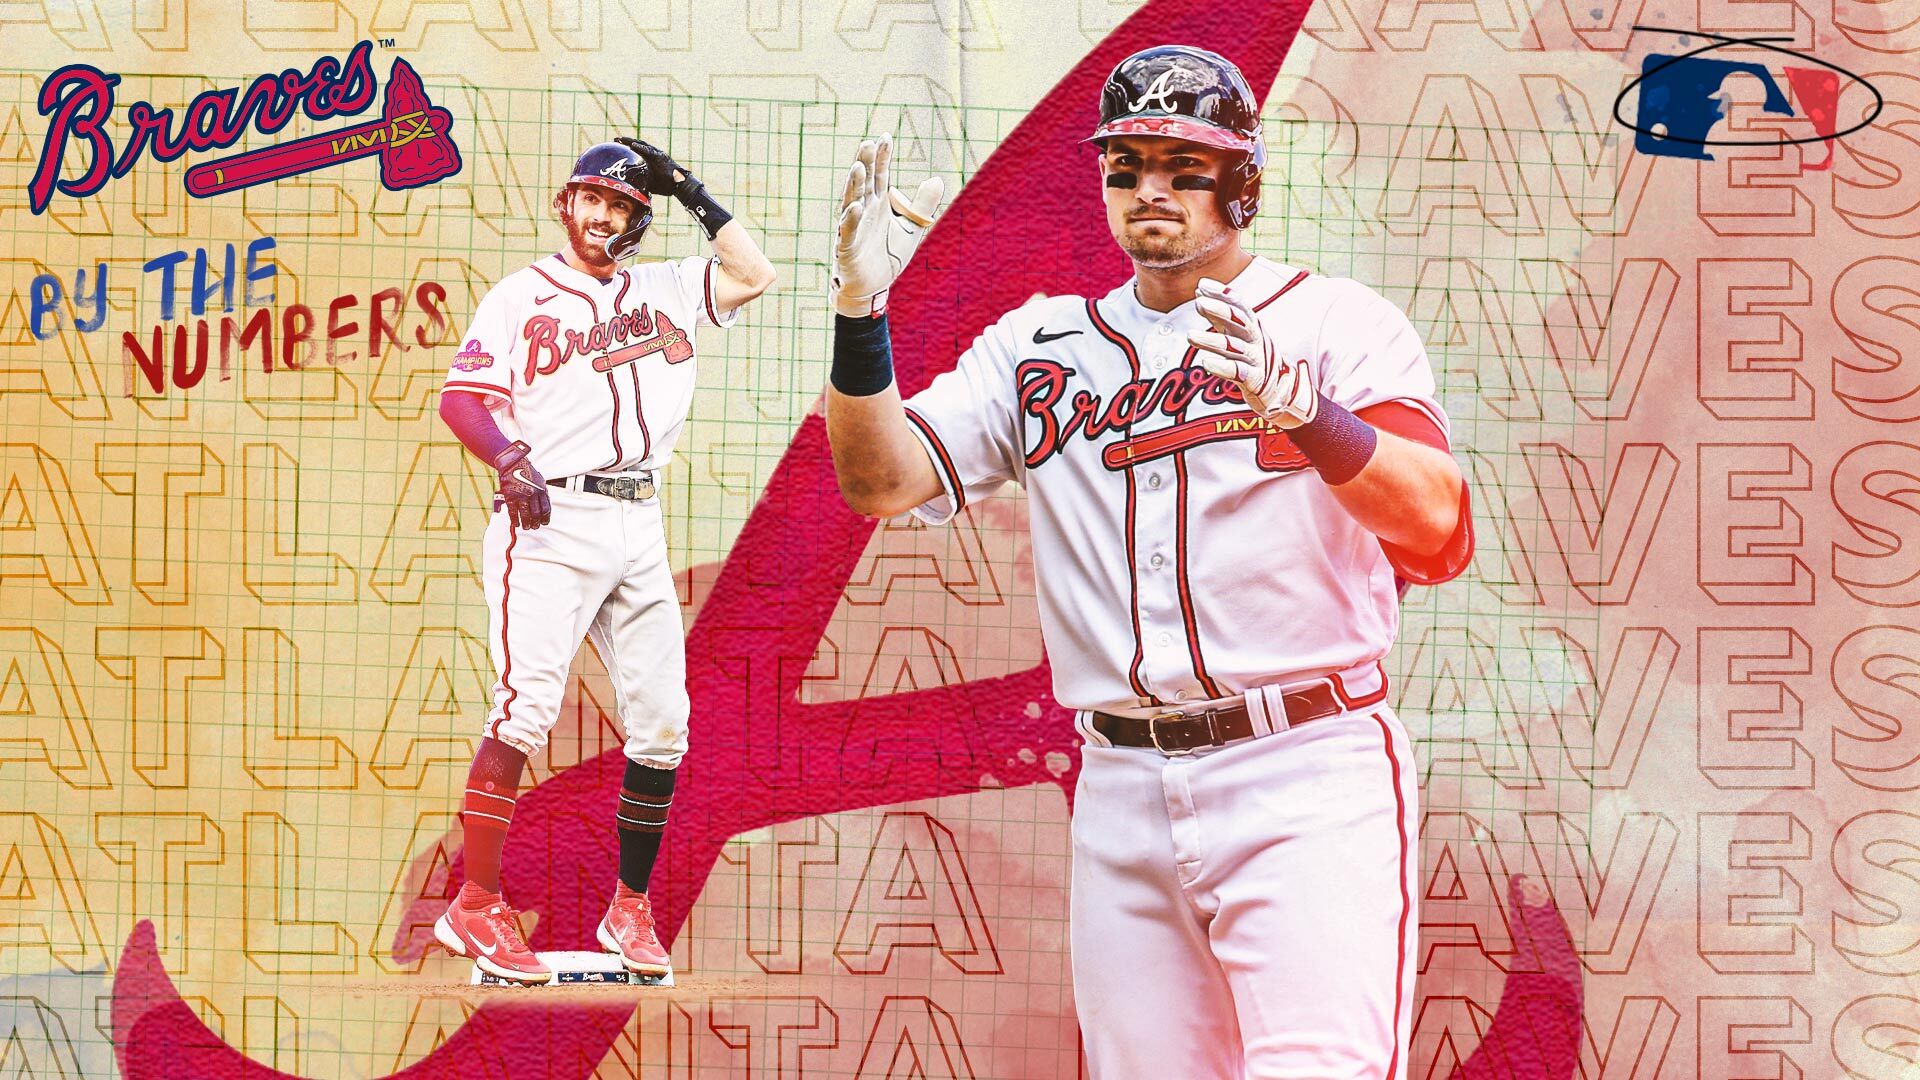 Atlanta Braves’ record 14game win streak By The Numbers A2Z Facts